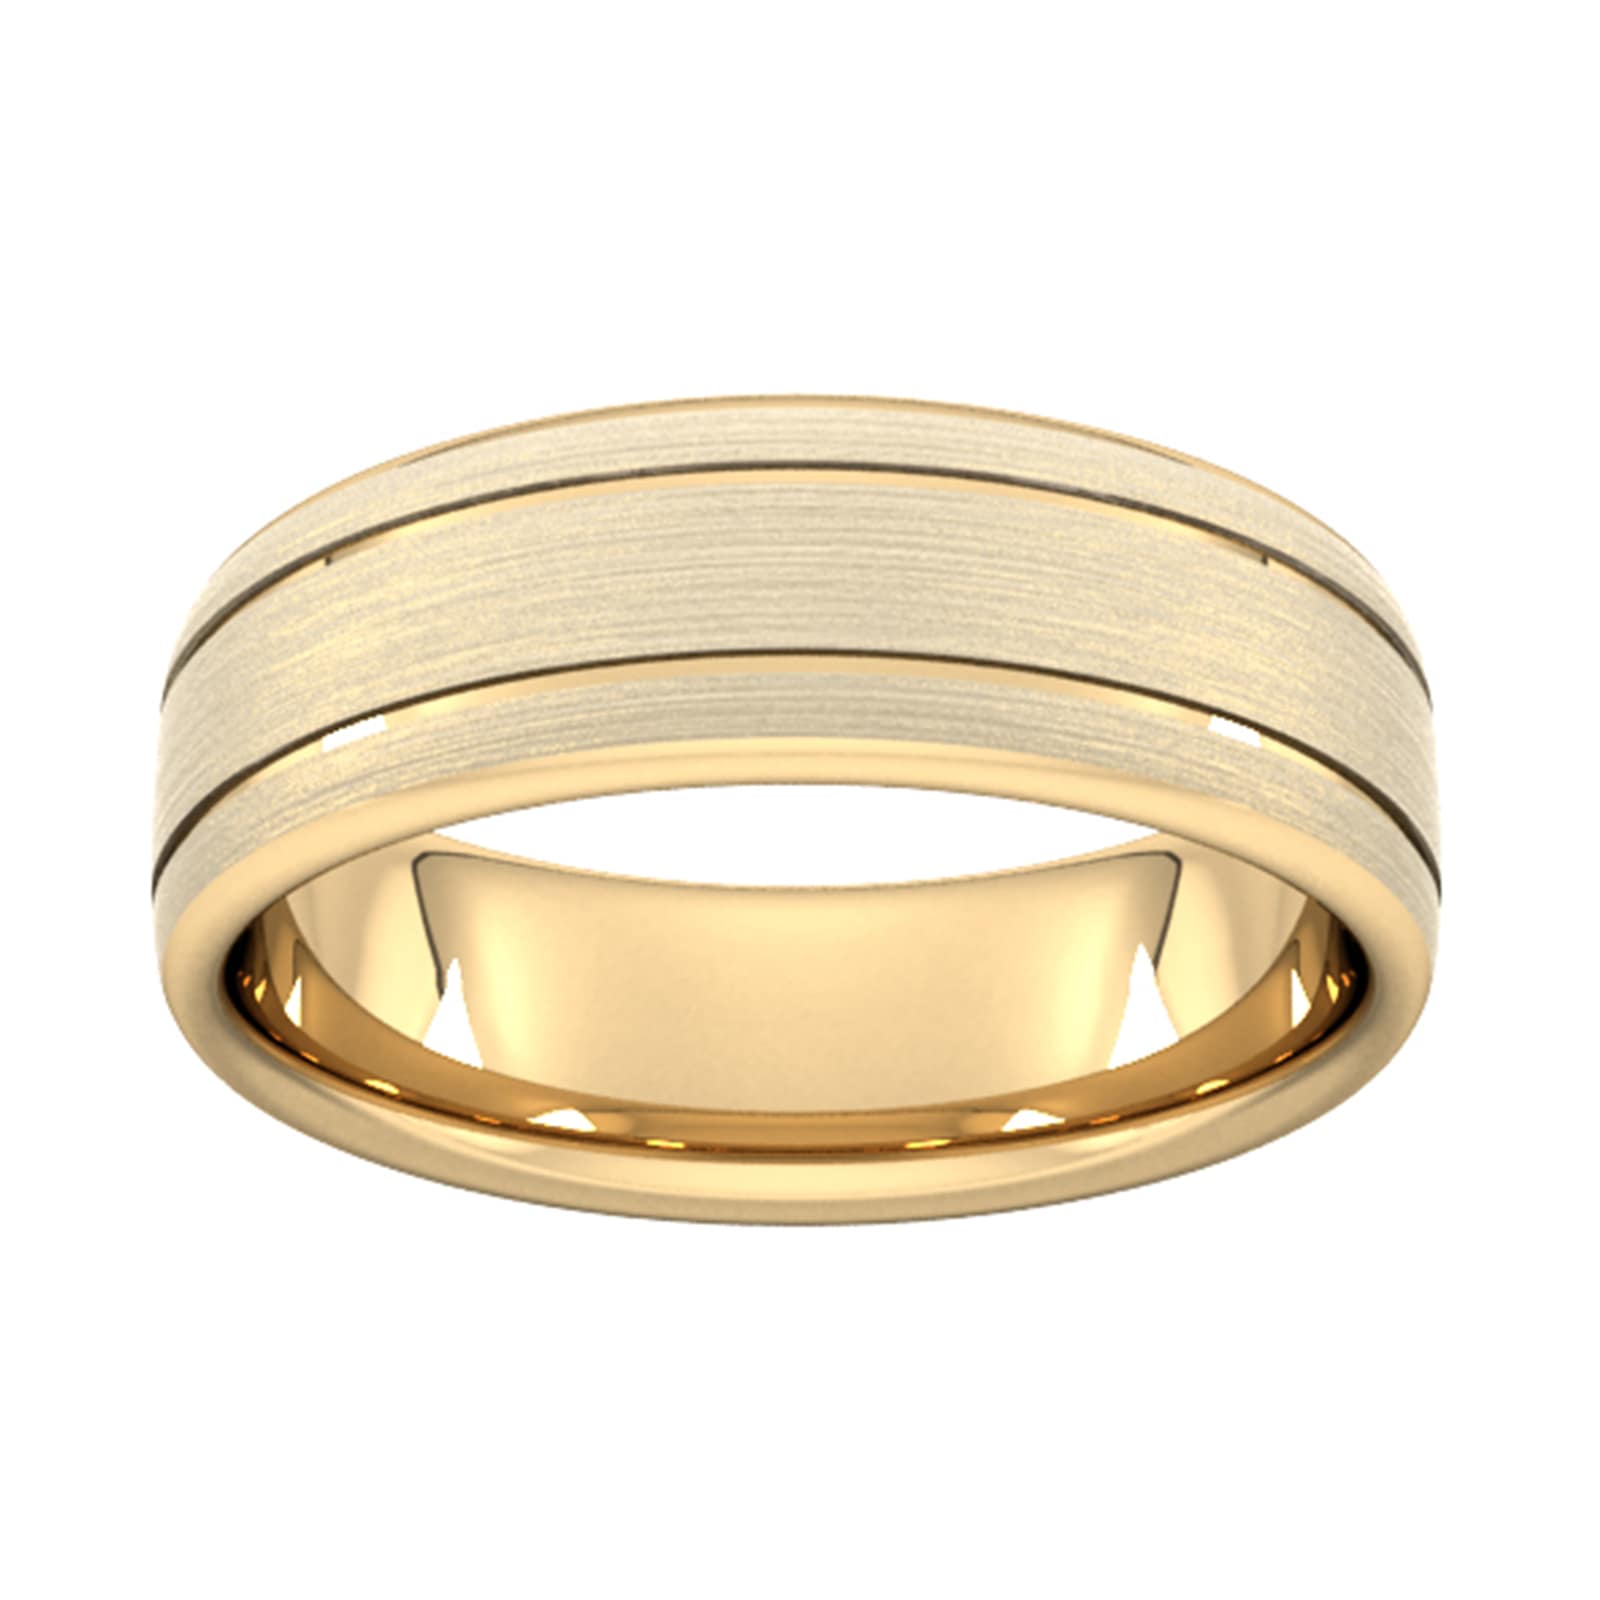 7mm Flat Court Heavy Matt Finish With Double Grooves Wedding Ring In 18 Carat Yellow Gold - Ring Size V